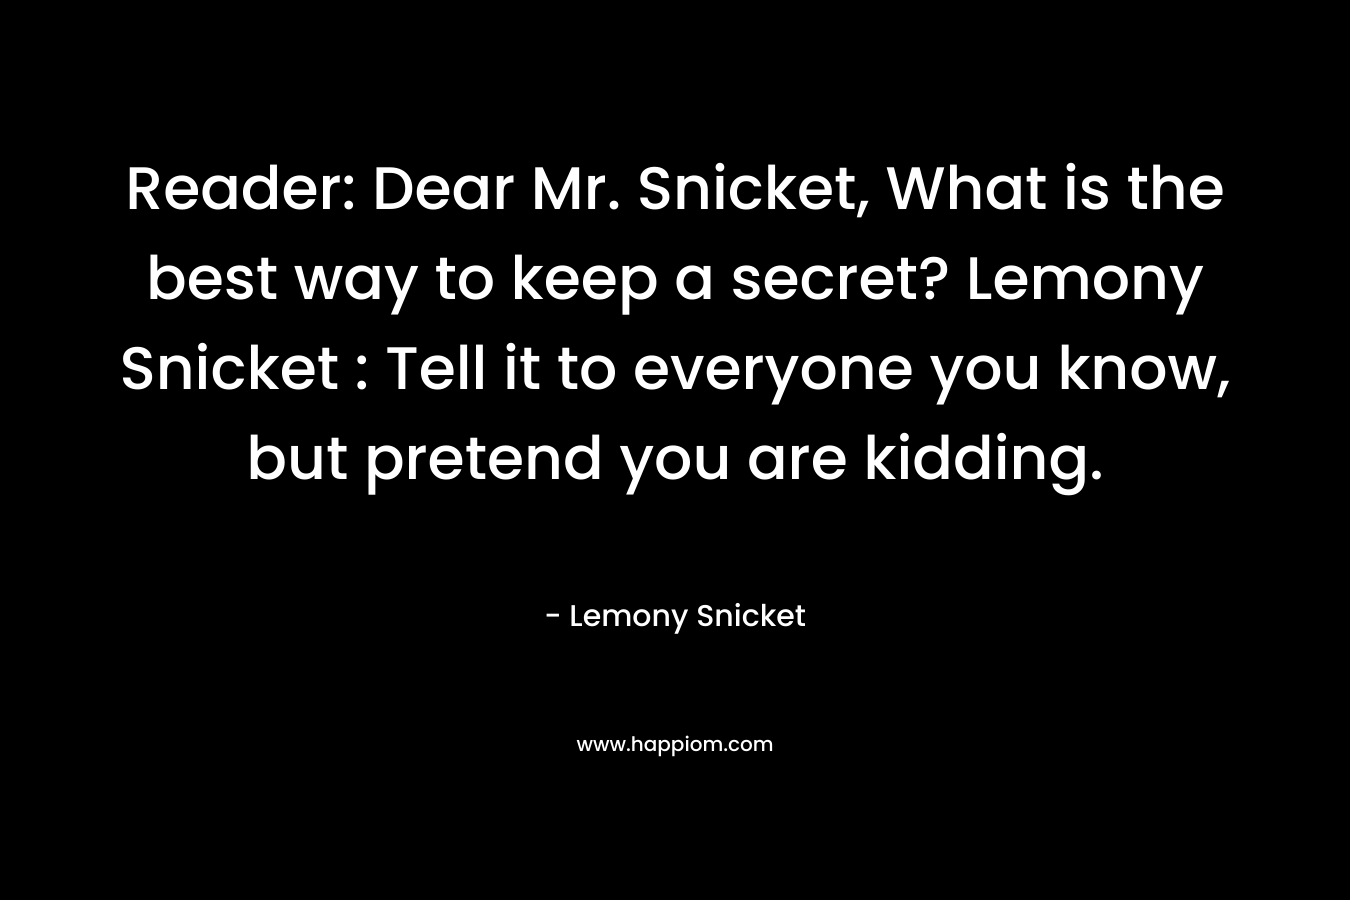 Reader: Dear Mr. Snicket, What is the best way to keep a secret? Lemony Snicket : Tell it to everyone you know, but pretend you are kidding.